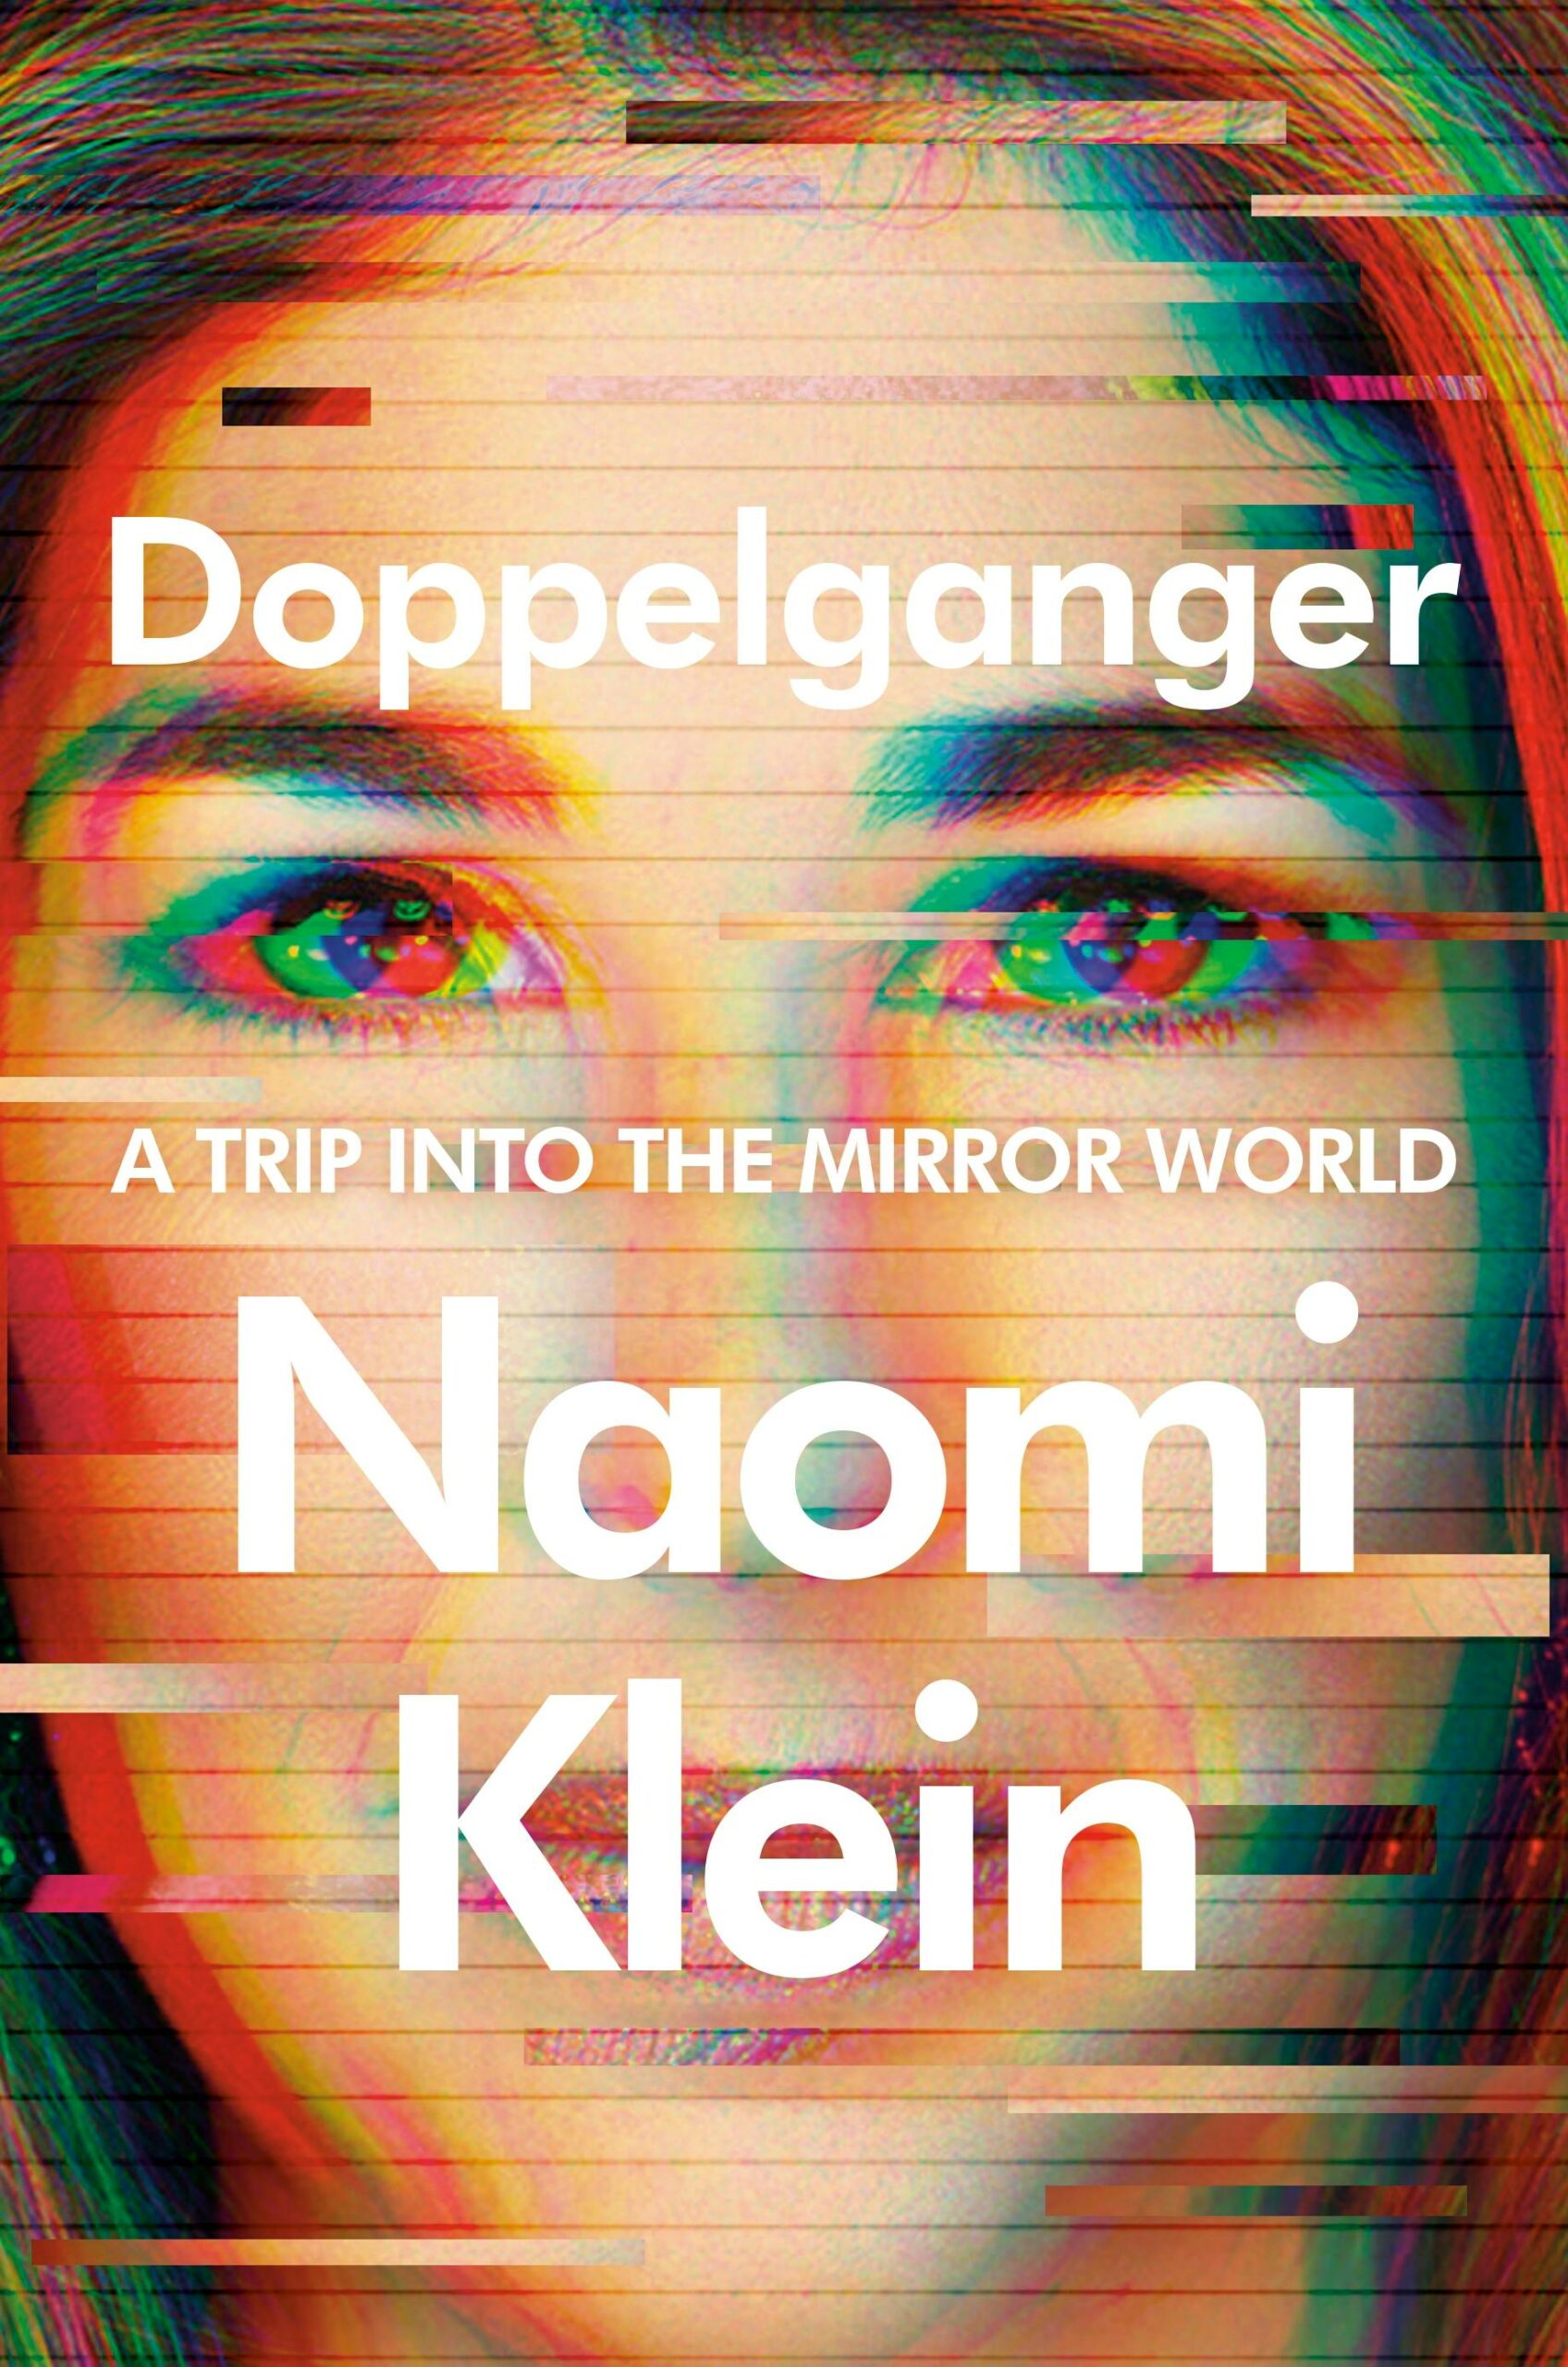 Doppelganger by Naomi Klein. Book cover shows a blurry close-up image of author's face.